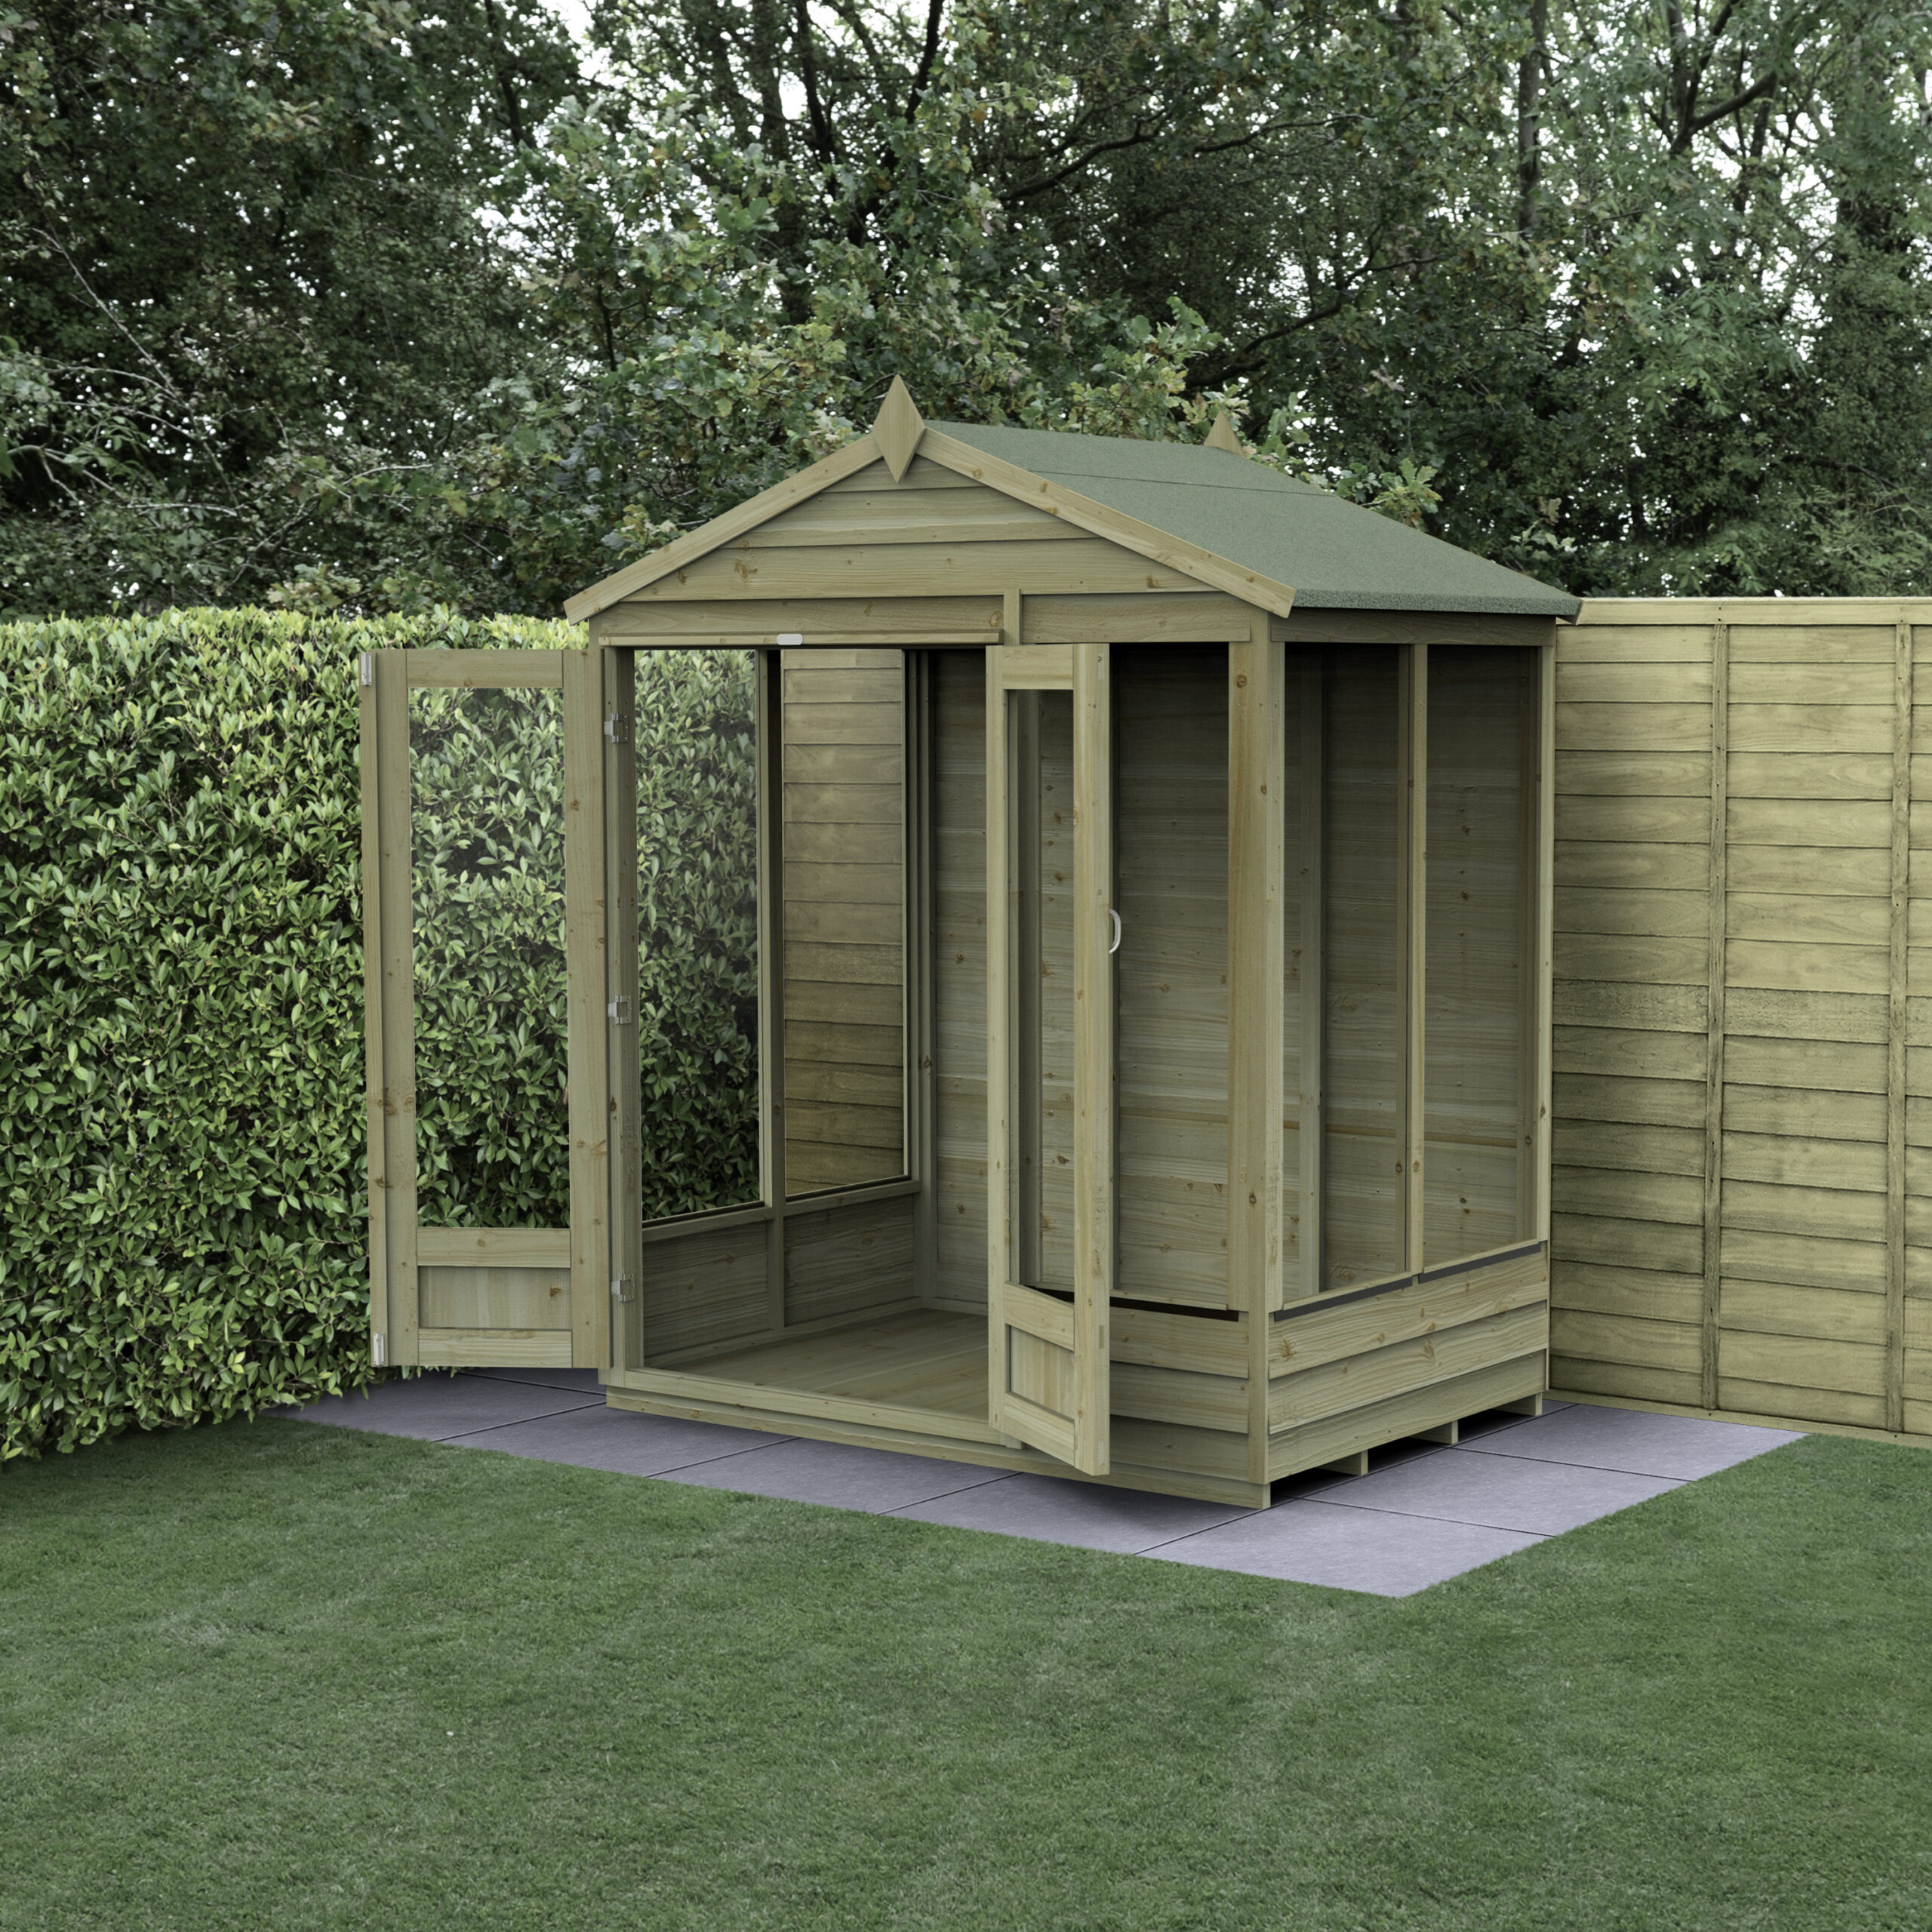 Forest Garden 6x4 4Life Overlap Apex Pressure Treated Summerhouse (Installation Included)